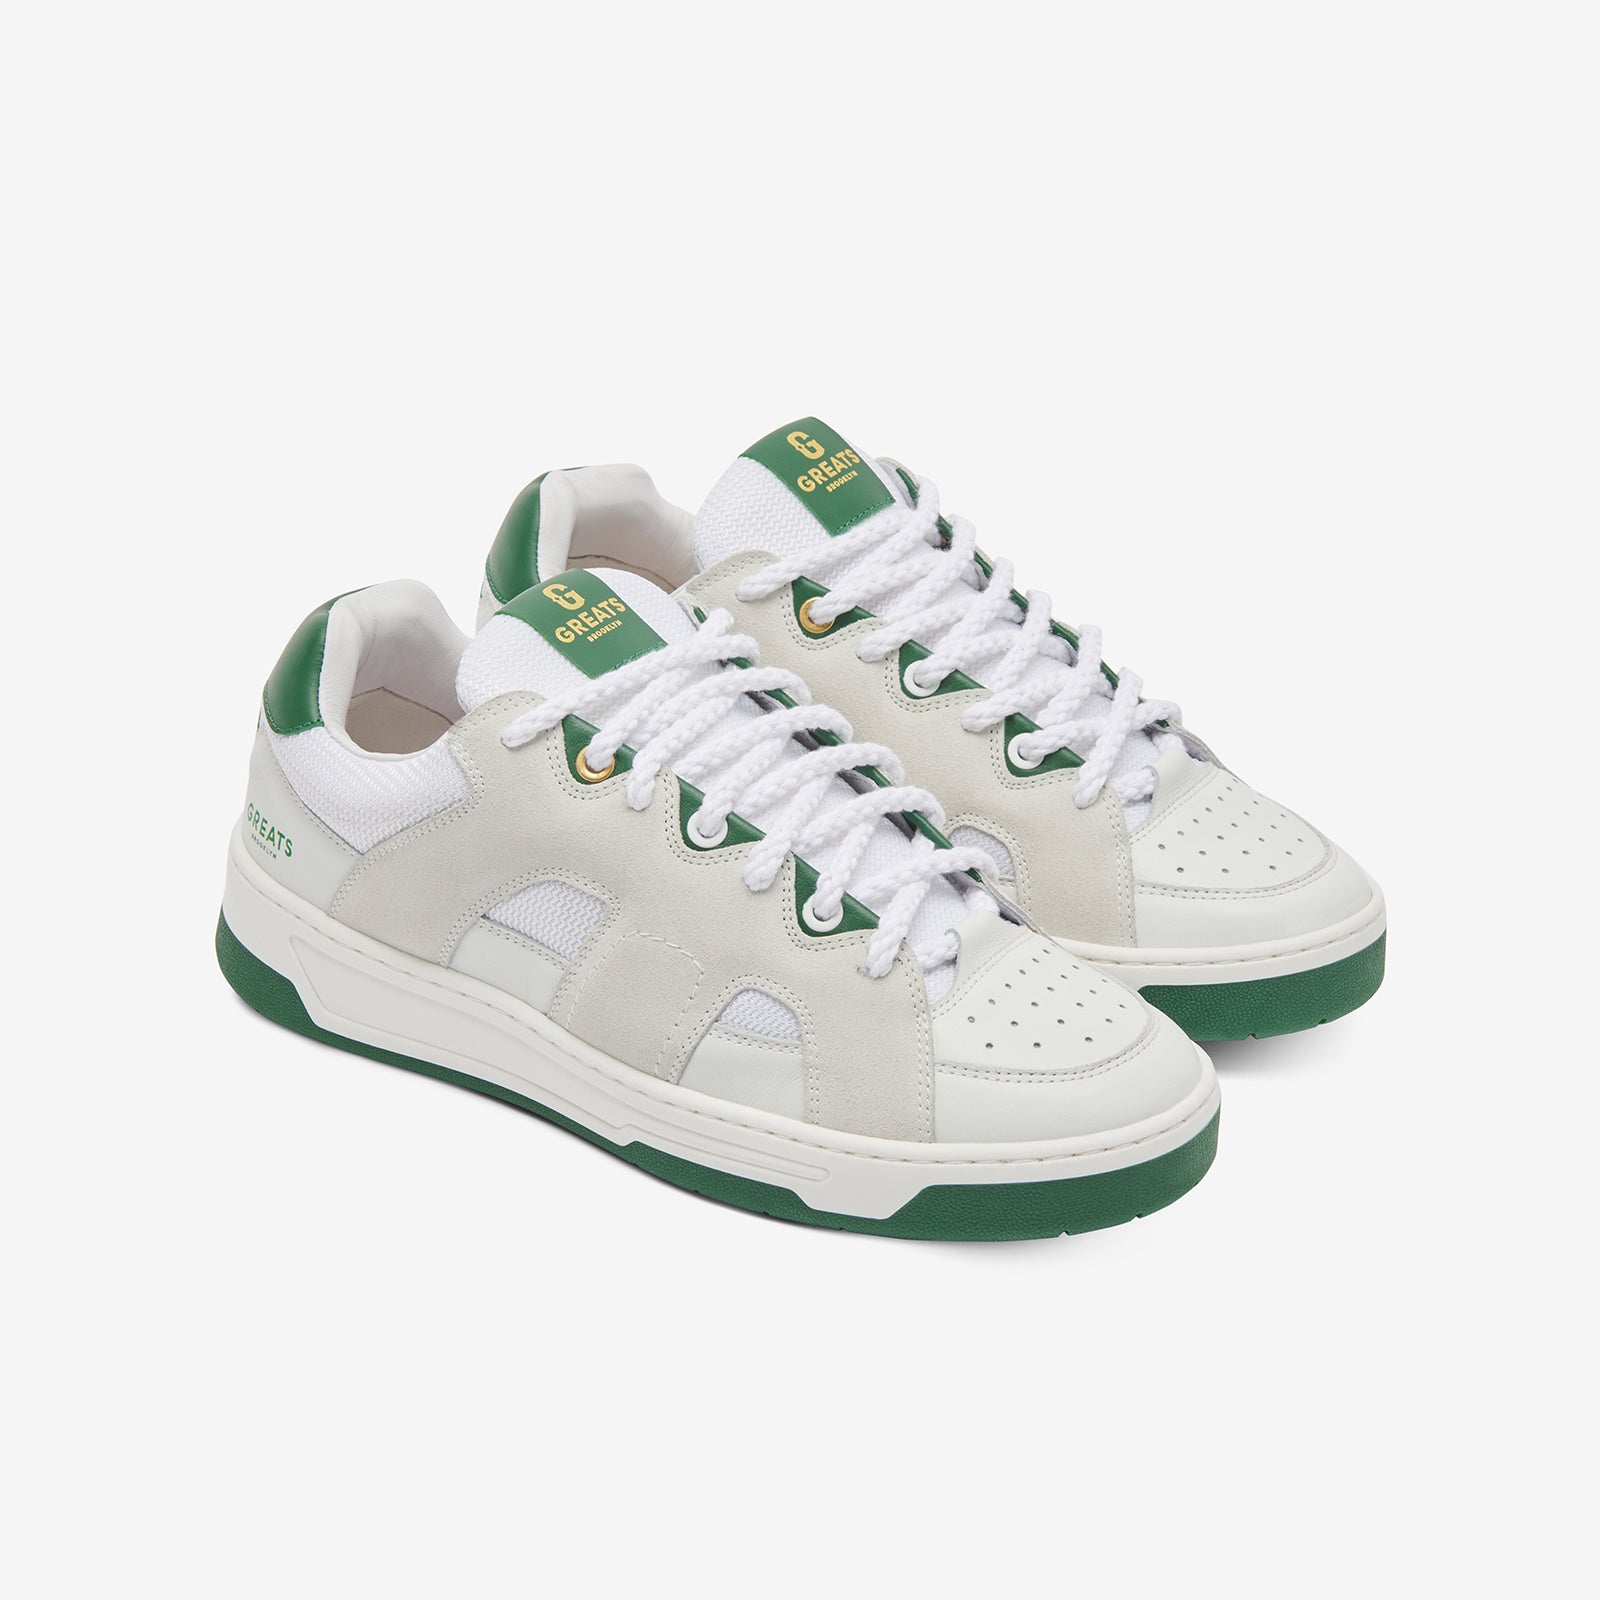 Louis Vuitton LV Skate Leather Green Low Top Sneakers